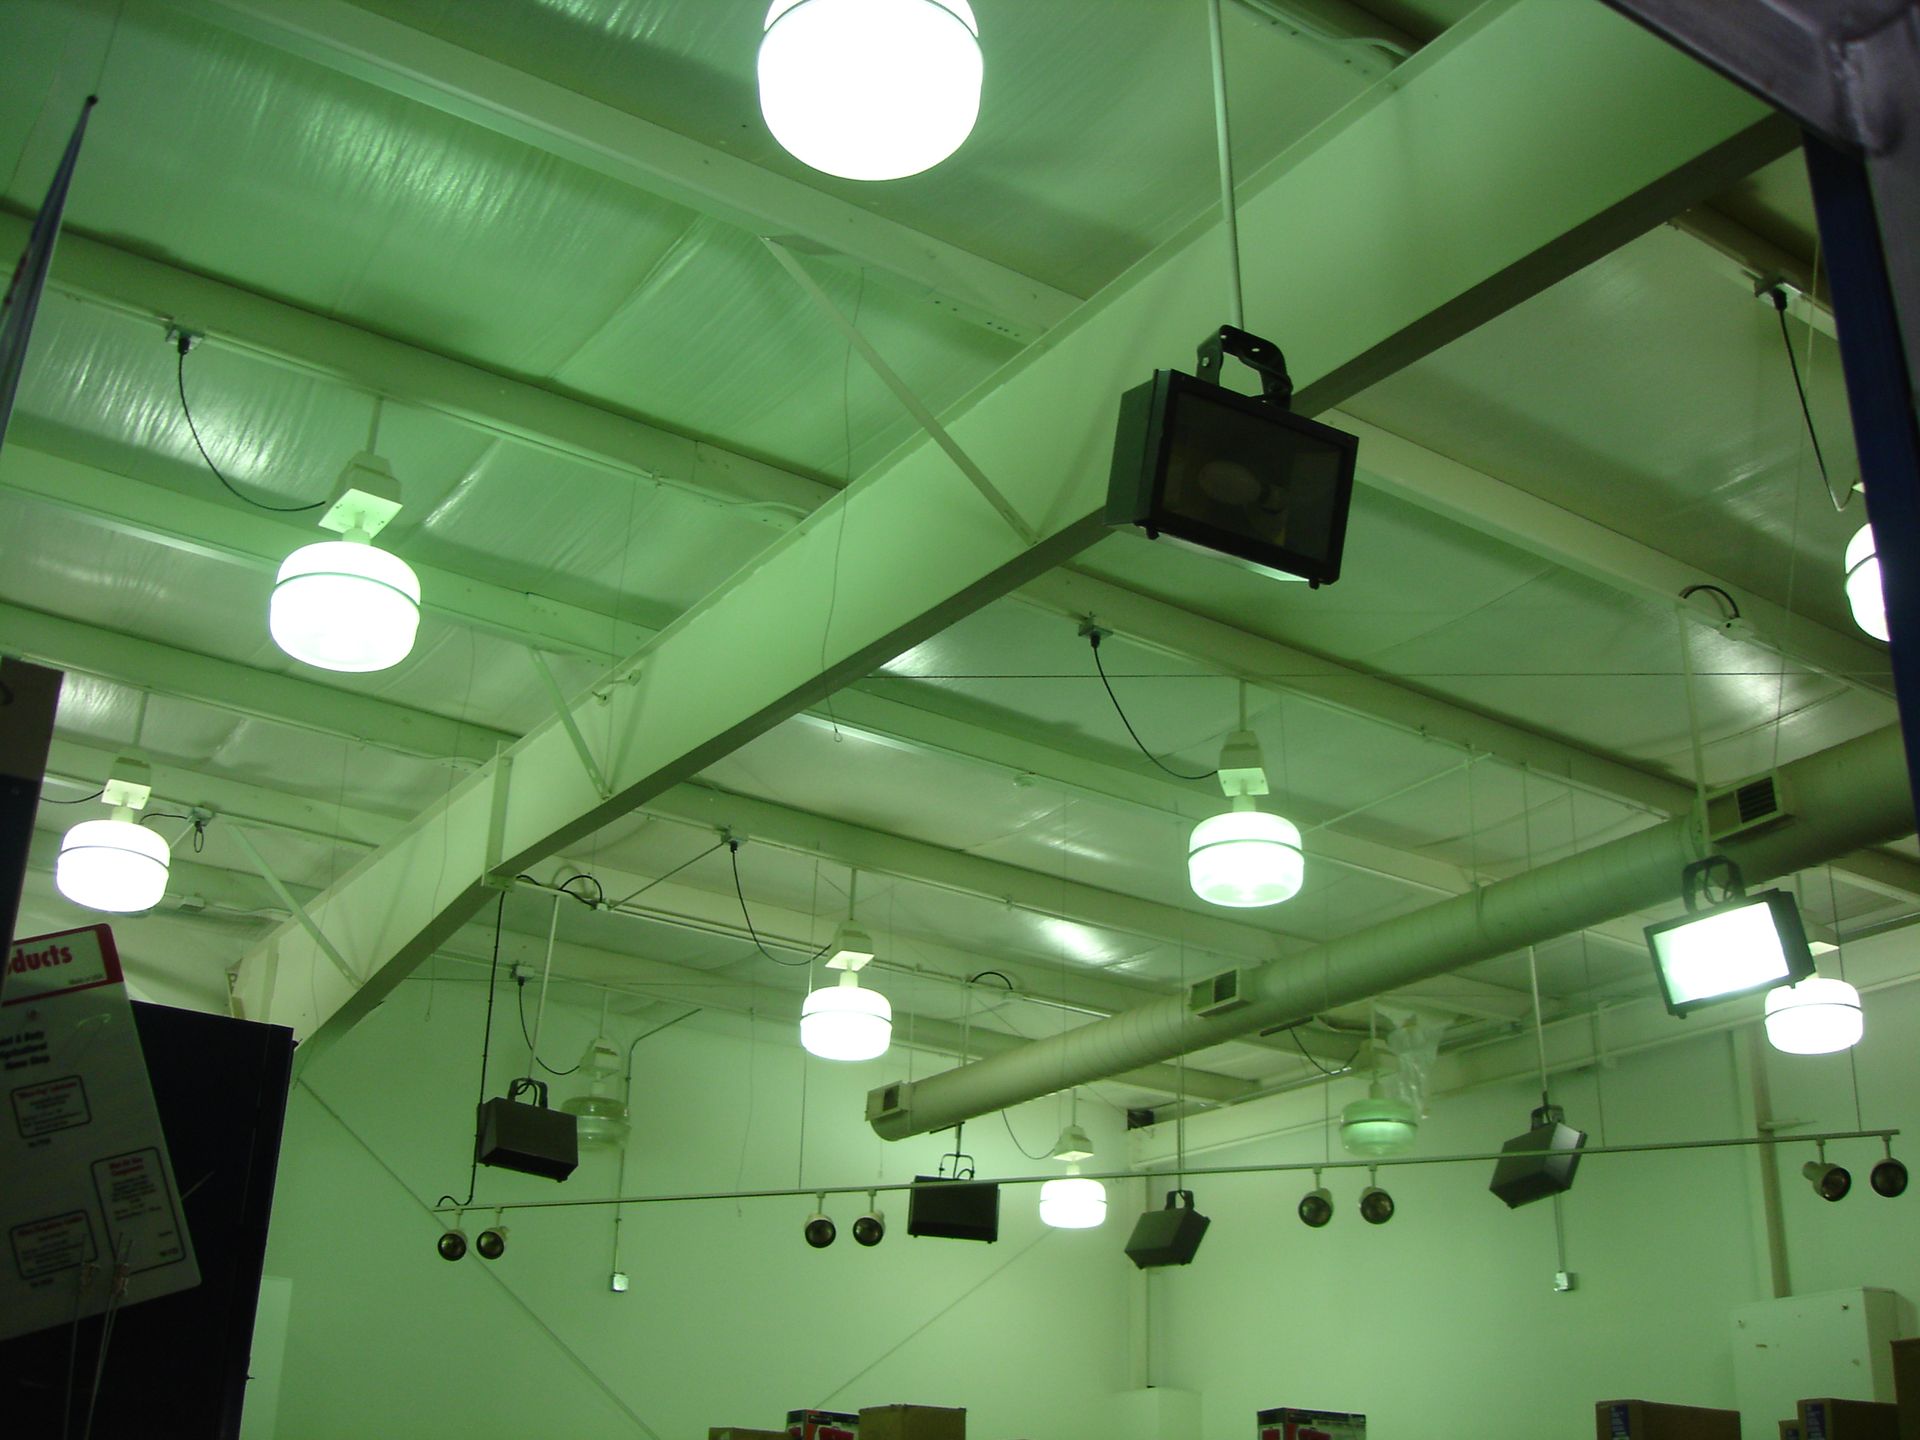 A large room with lots of lights hanging from the ceiling